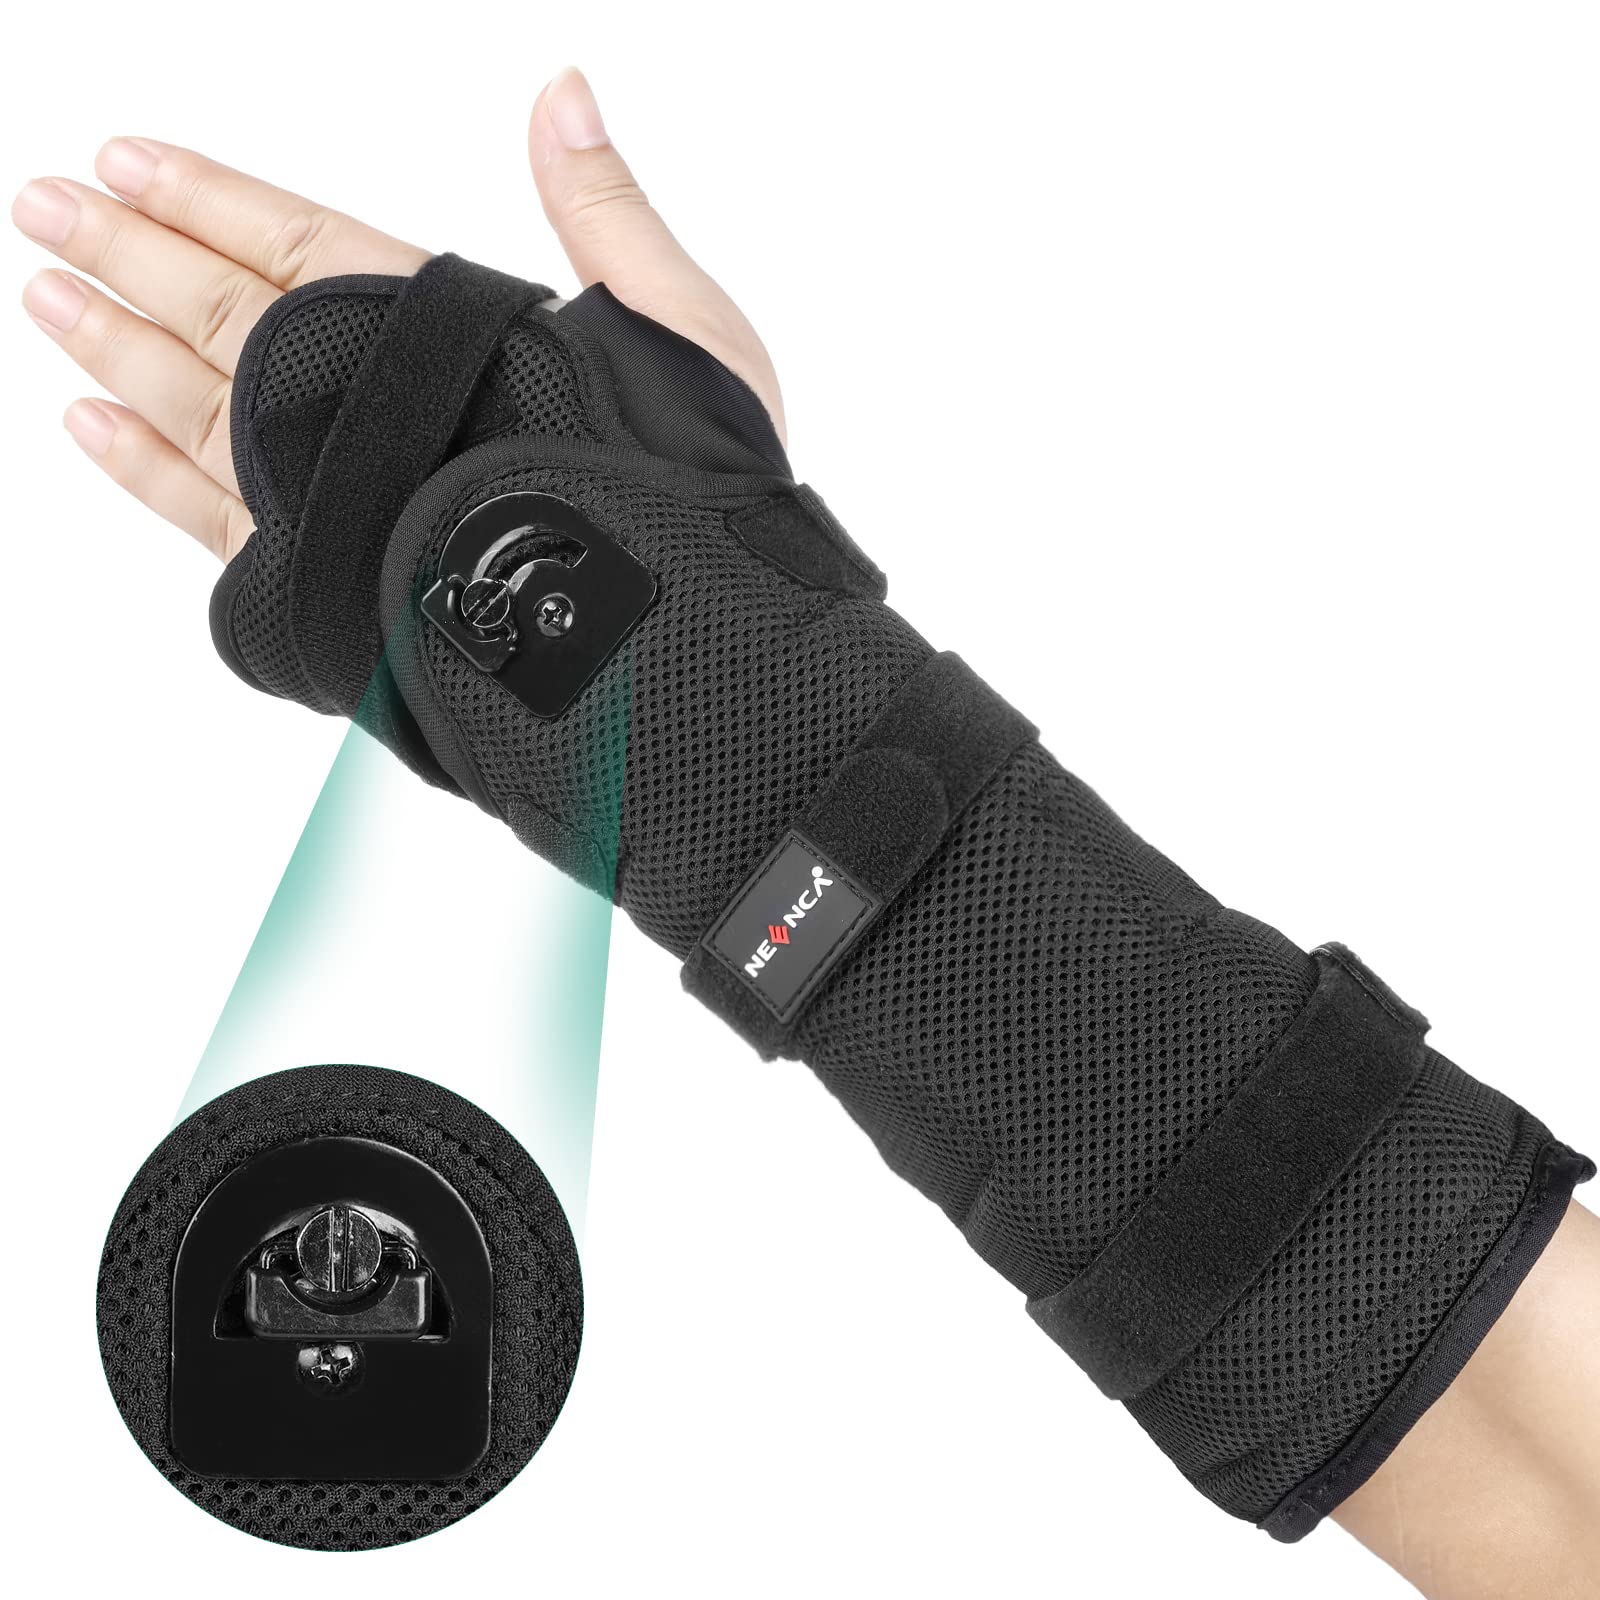 NEENCA Wrist Support Brace, Night Sleep Hand Support Brace with Splints and  Adjustment Knob, Palm Wrist Orthosis - Fits Both Hands -Help With Carpal  Tunnel, Relieve and Treat Wrist Pain or Injuries